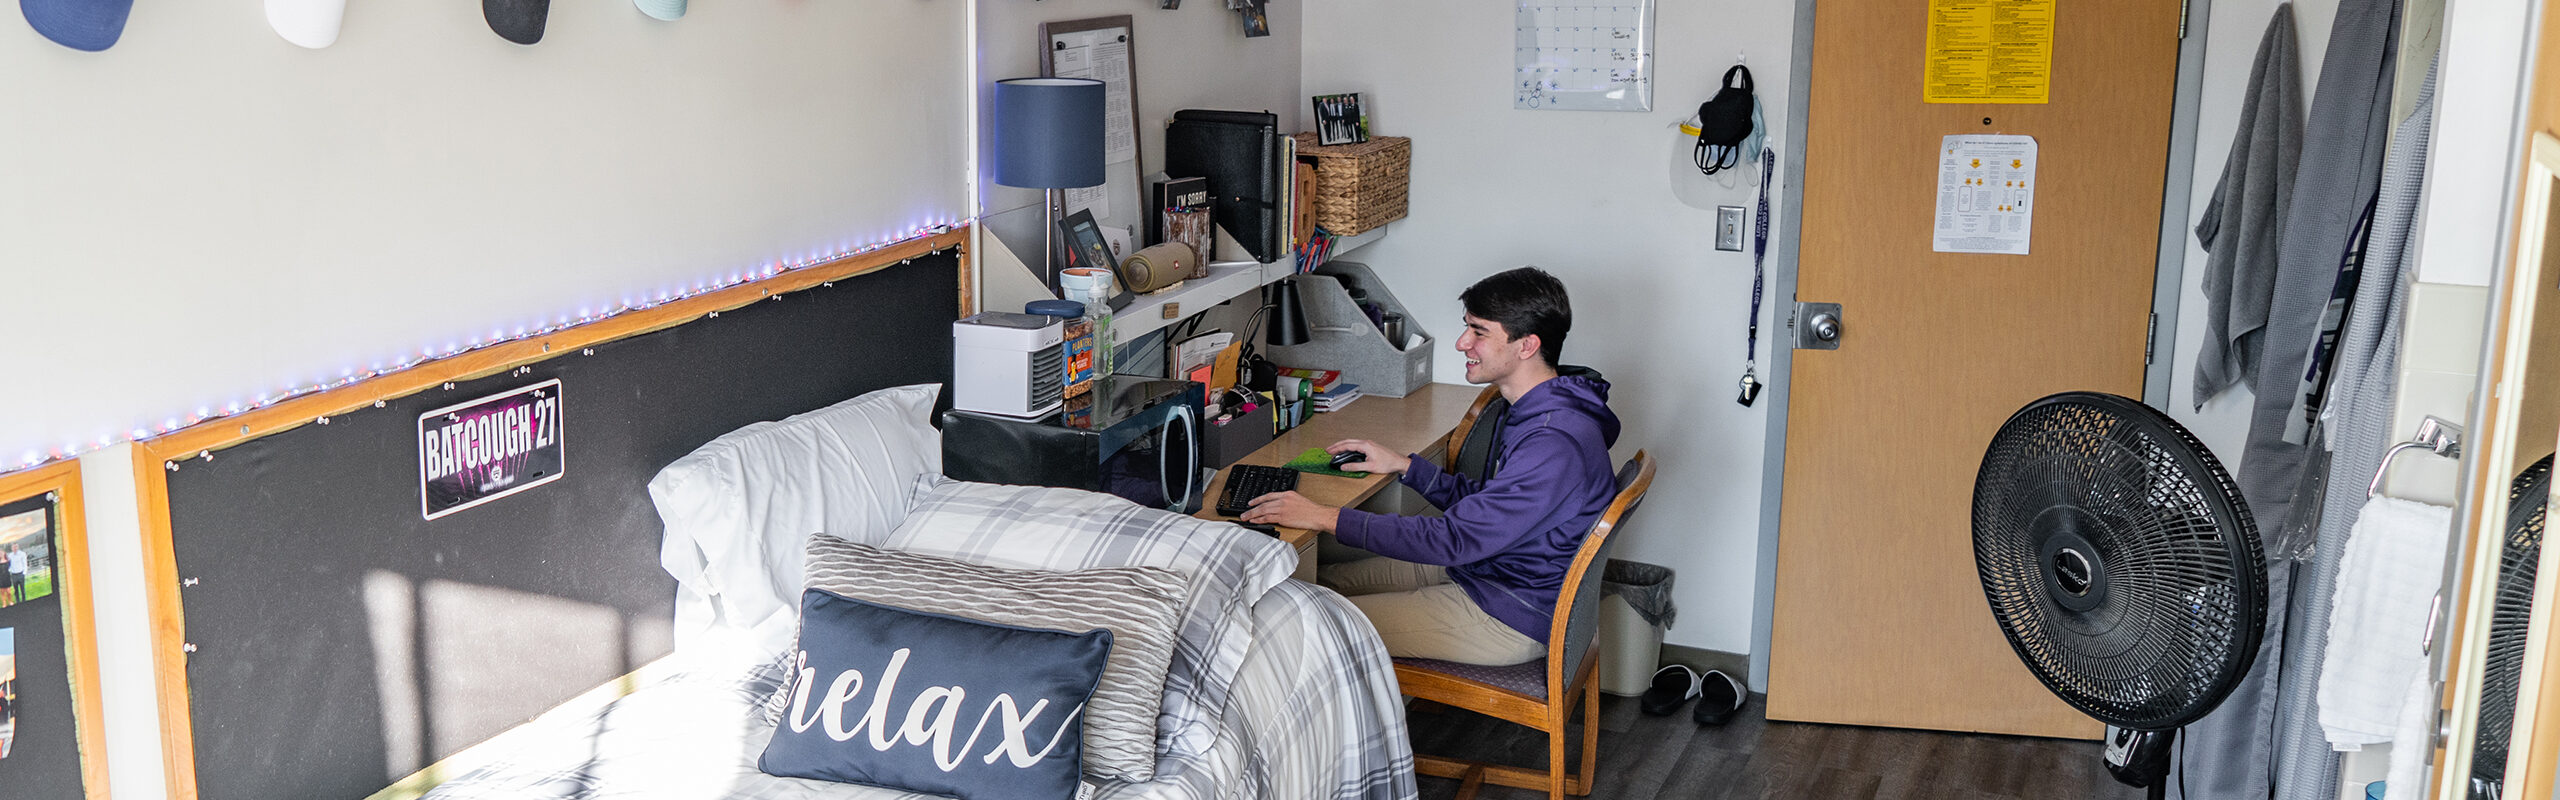 Student at their desk studying in their residence hall room